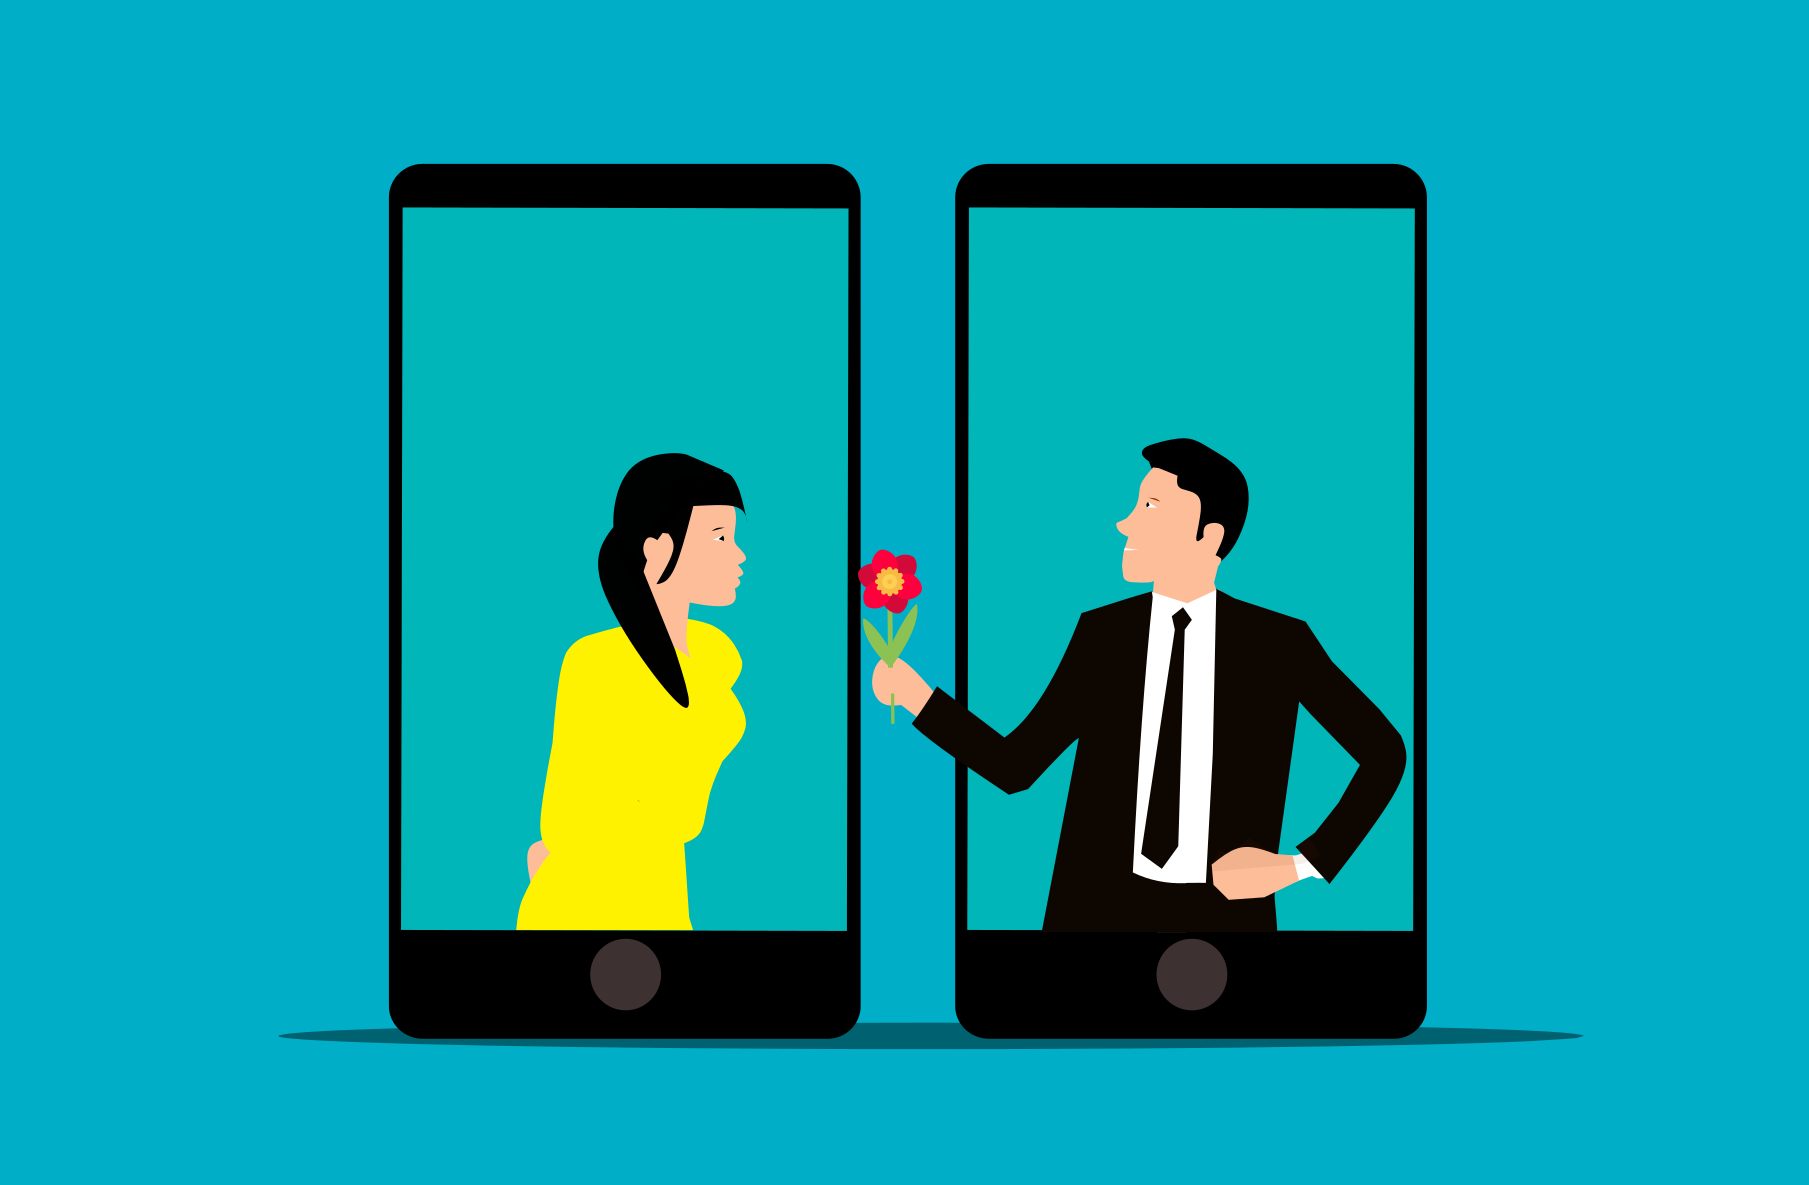 In an article about the female delusion calculator, a man in a suit, confined within a phone screen, offers a flower to a woman confined in a separate phone screen.